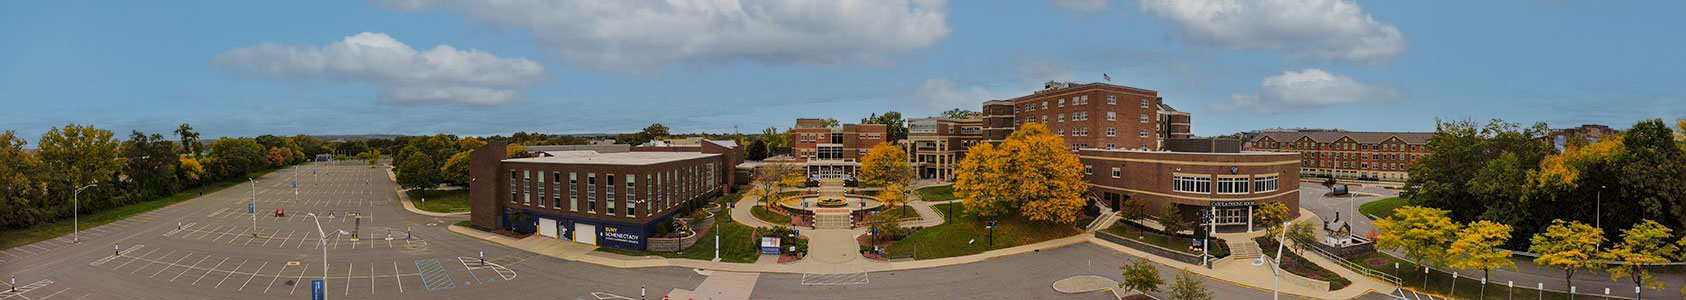 Panoramic image of campus, taken from the parking lot, facing the Quad.